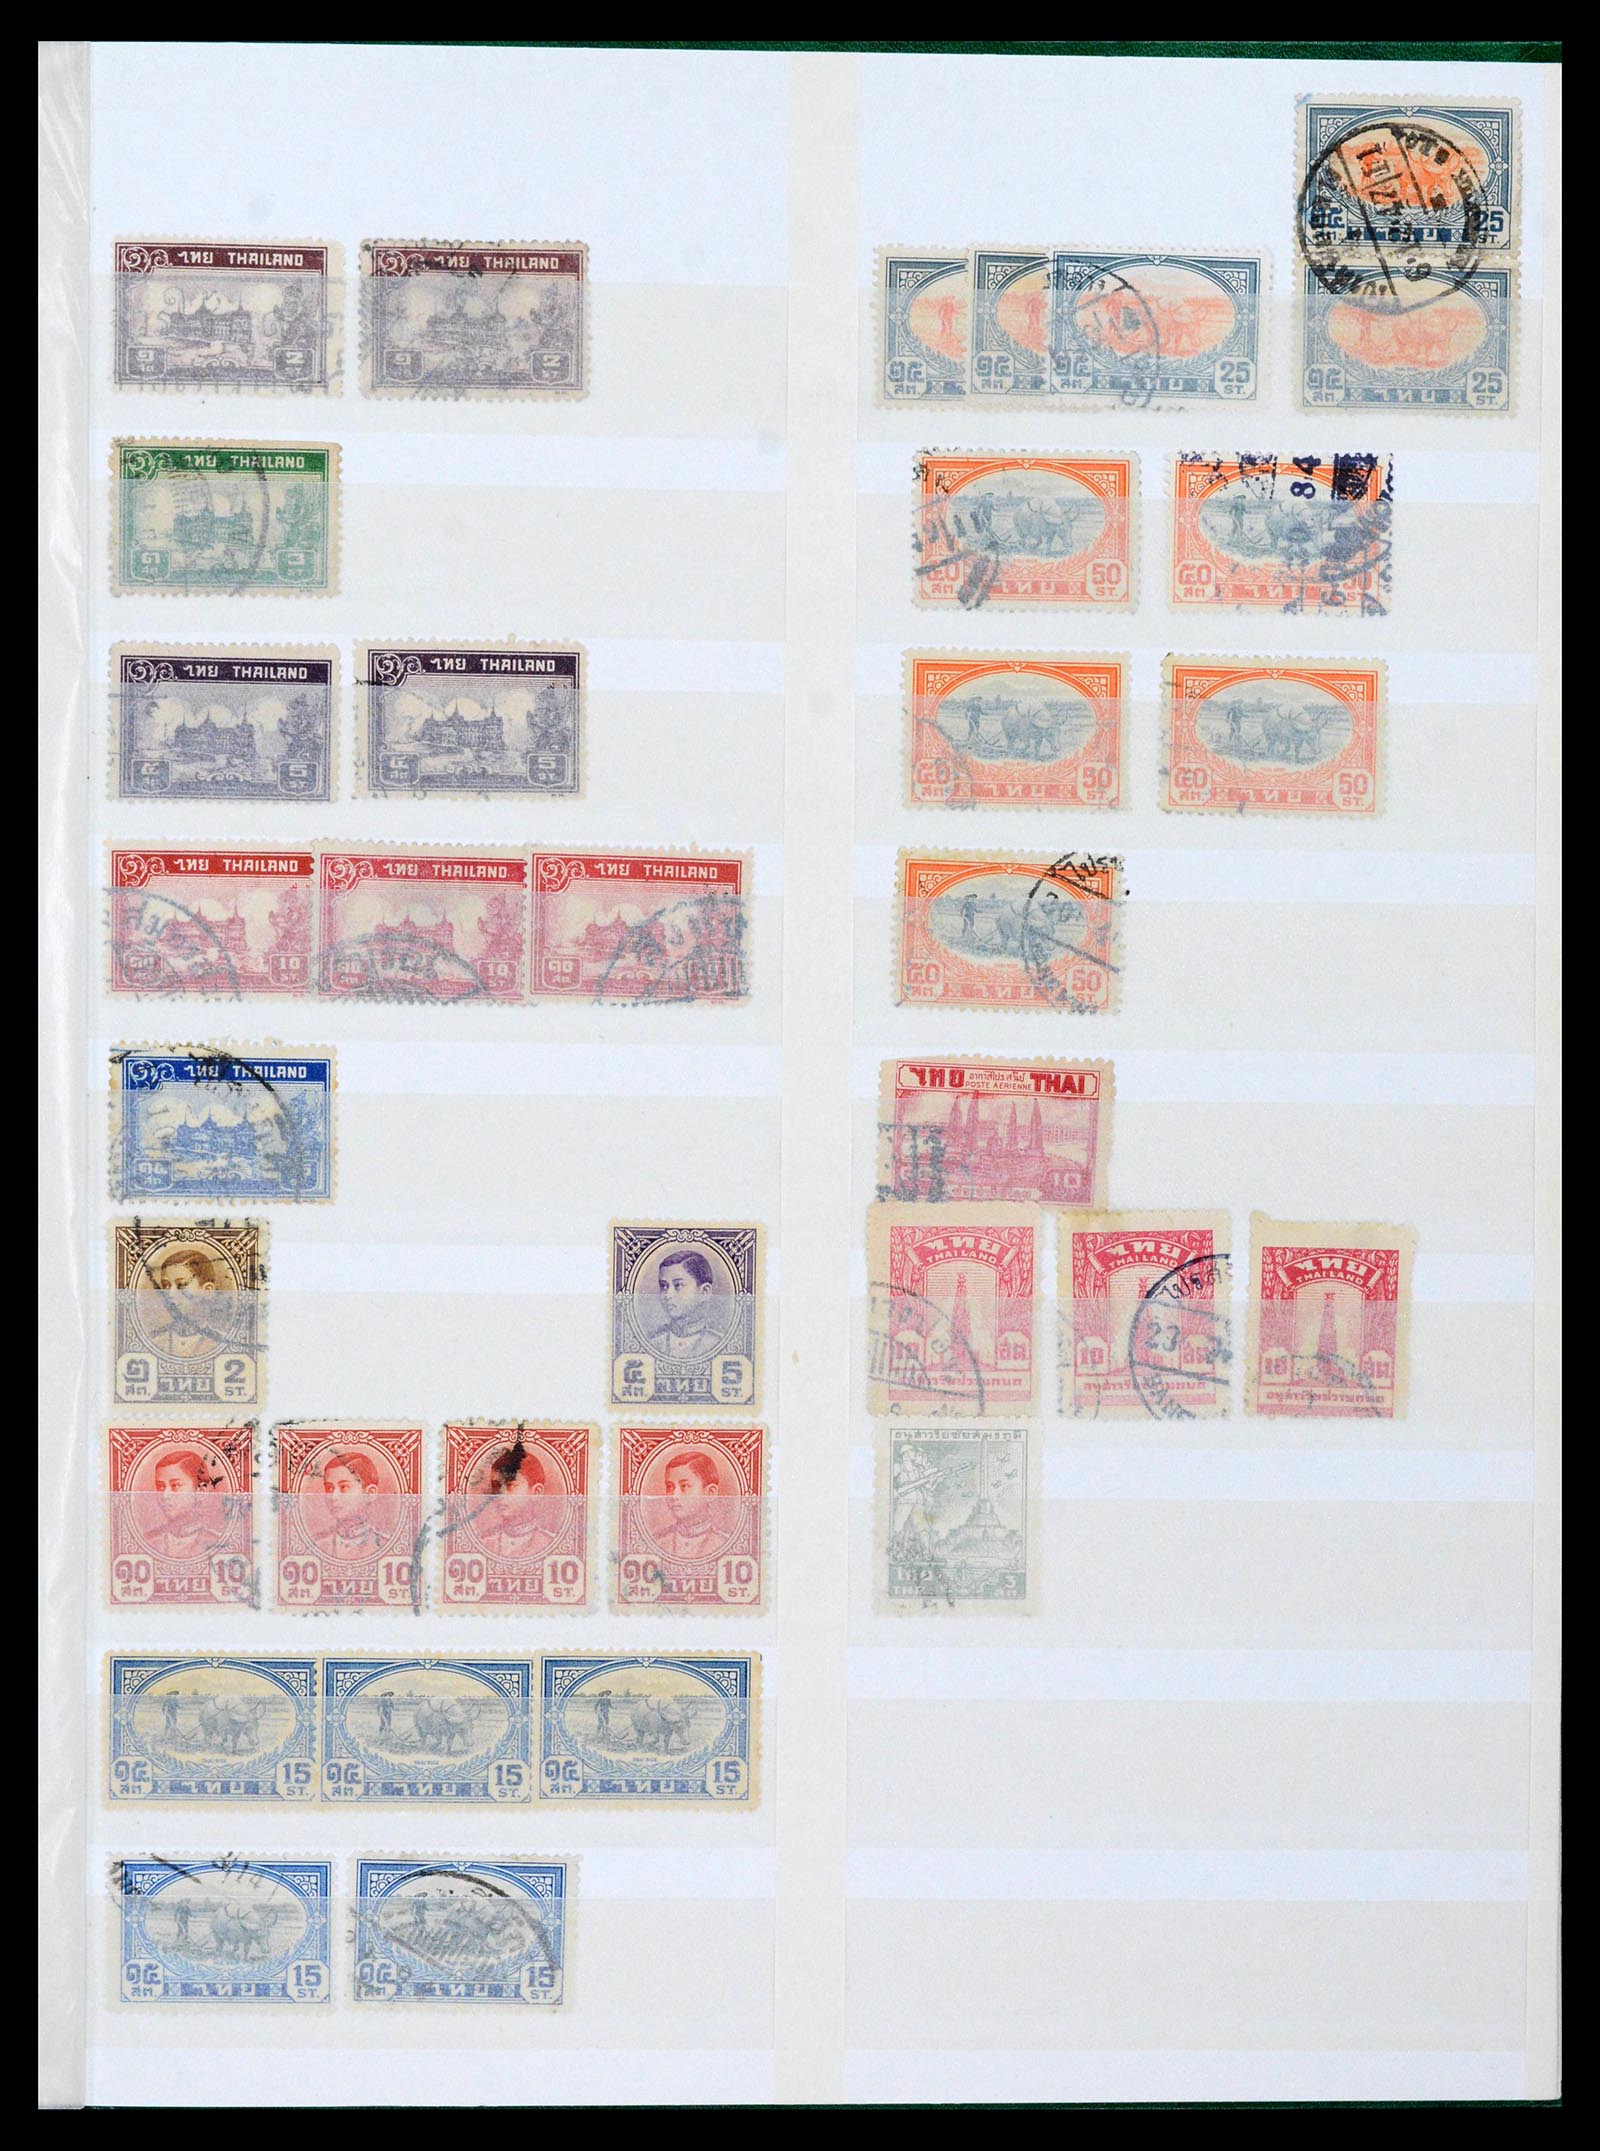 39384 0017 - Stamp collection 39384 Thailand 1883-2014.